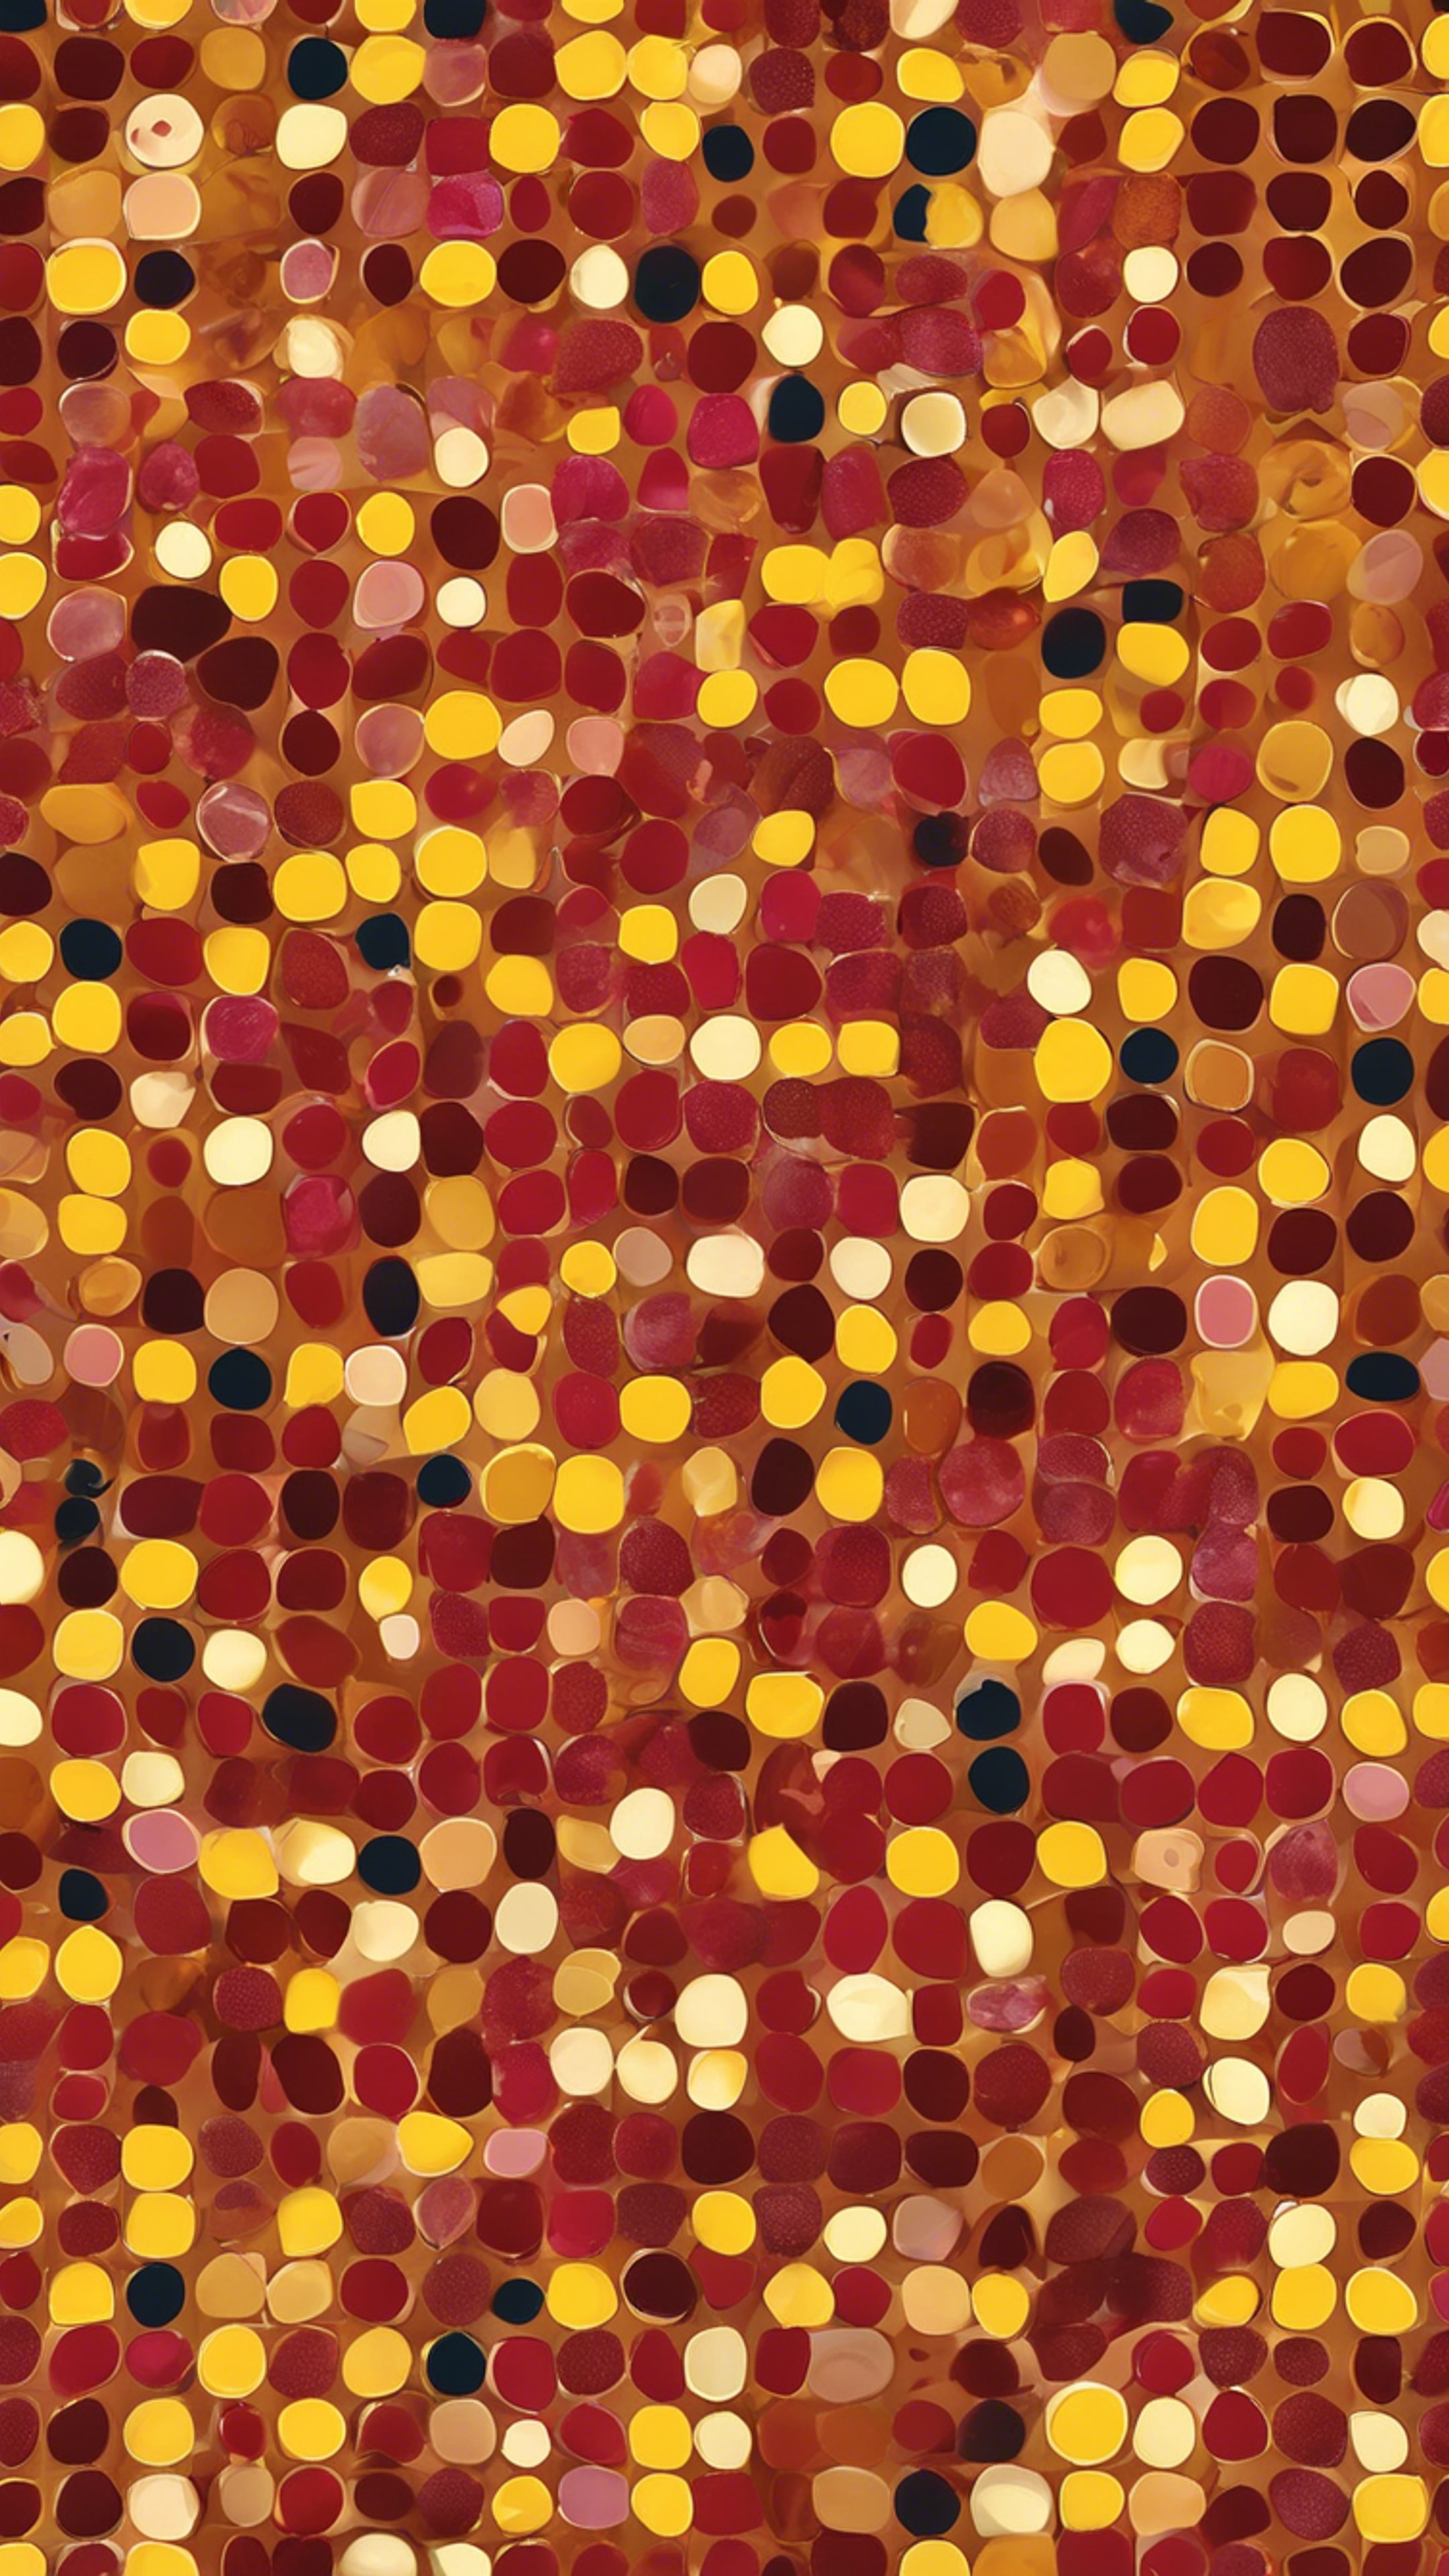 Vibrant pattern of polka dots, a mix of ruby red ones and mustard yellow ones. Taustakuva[8e468345fc0d4ef4ba5a]